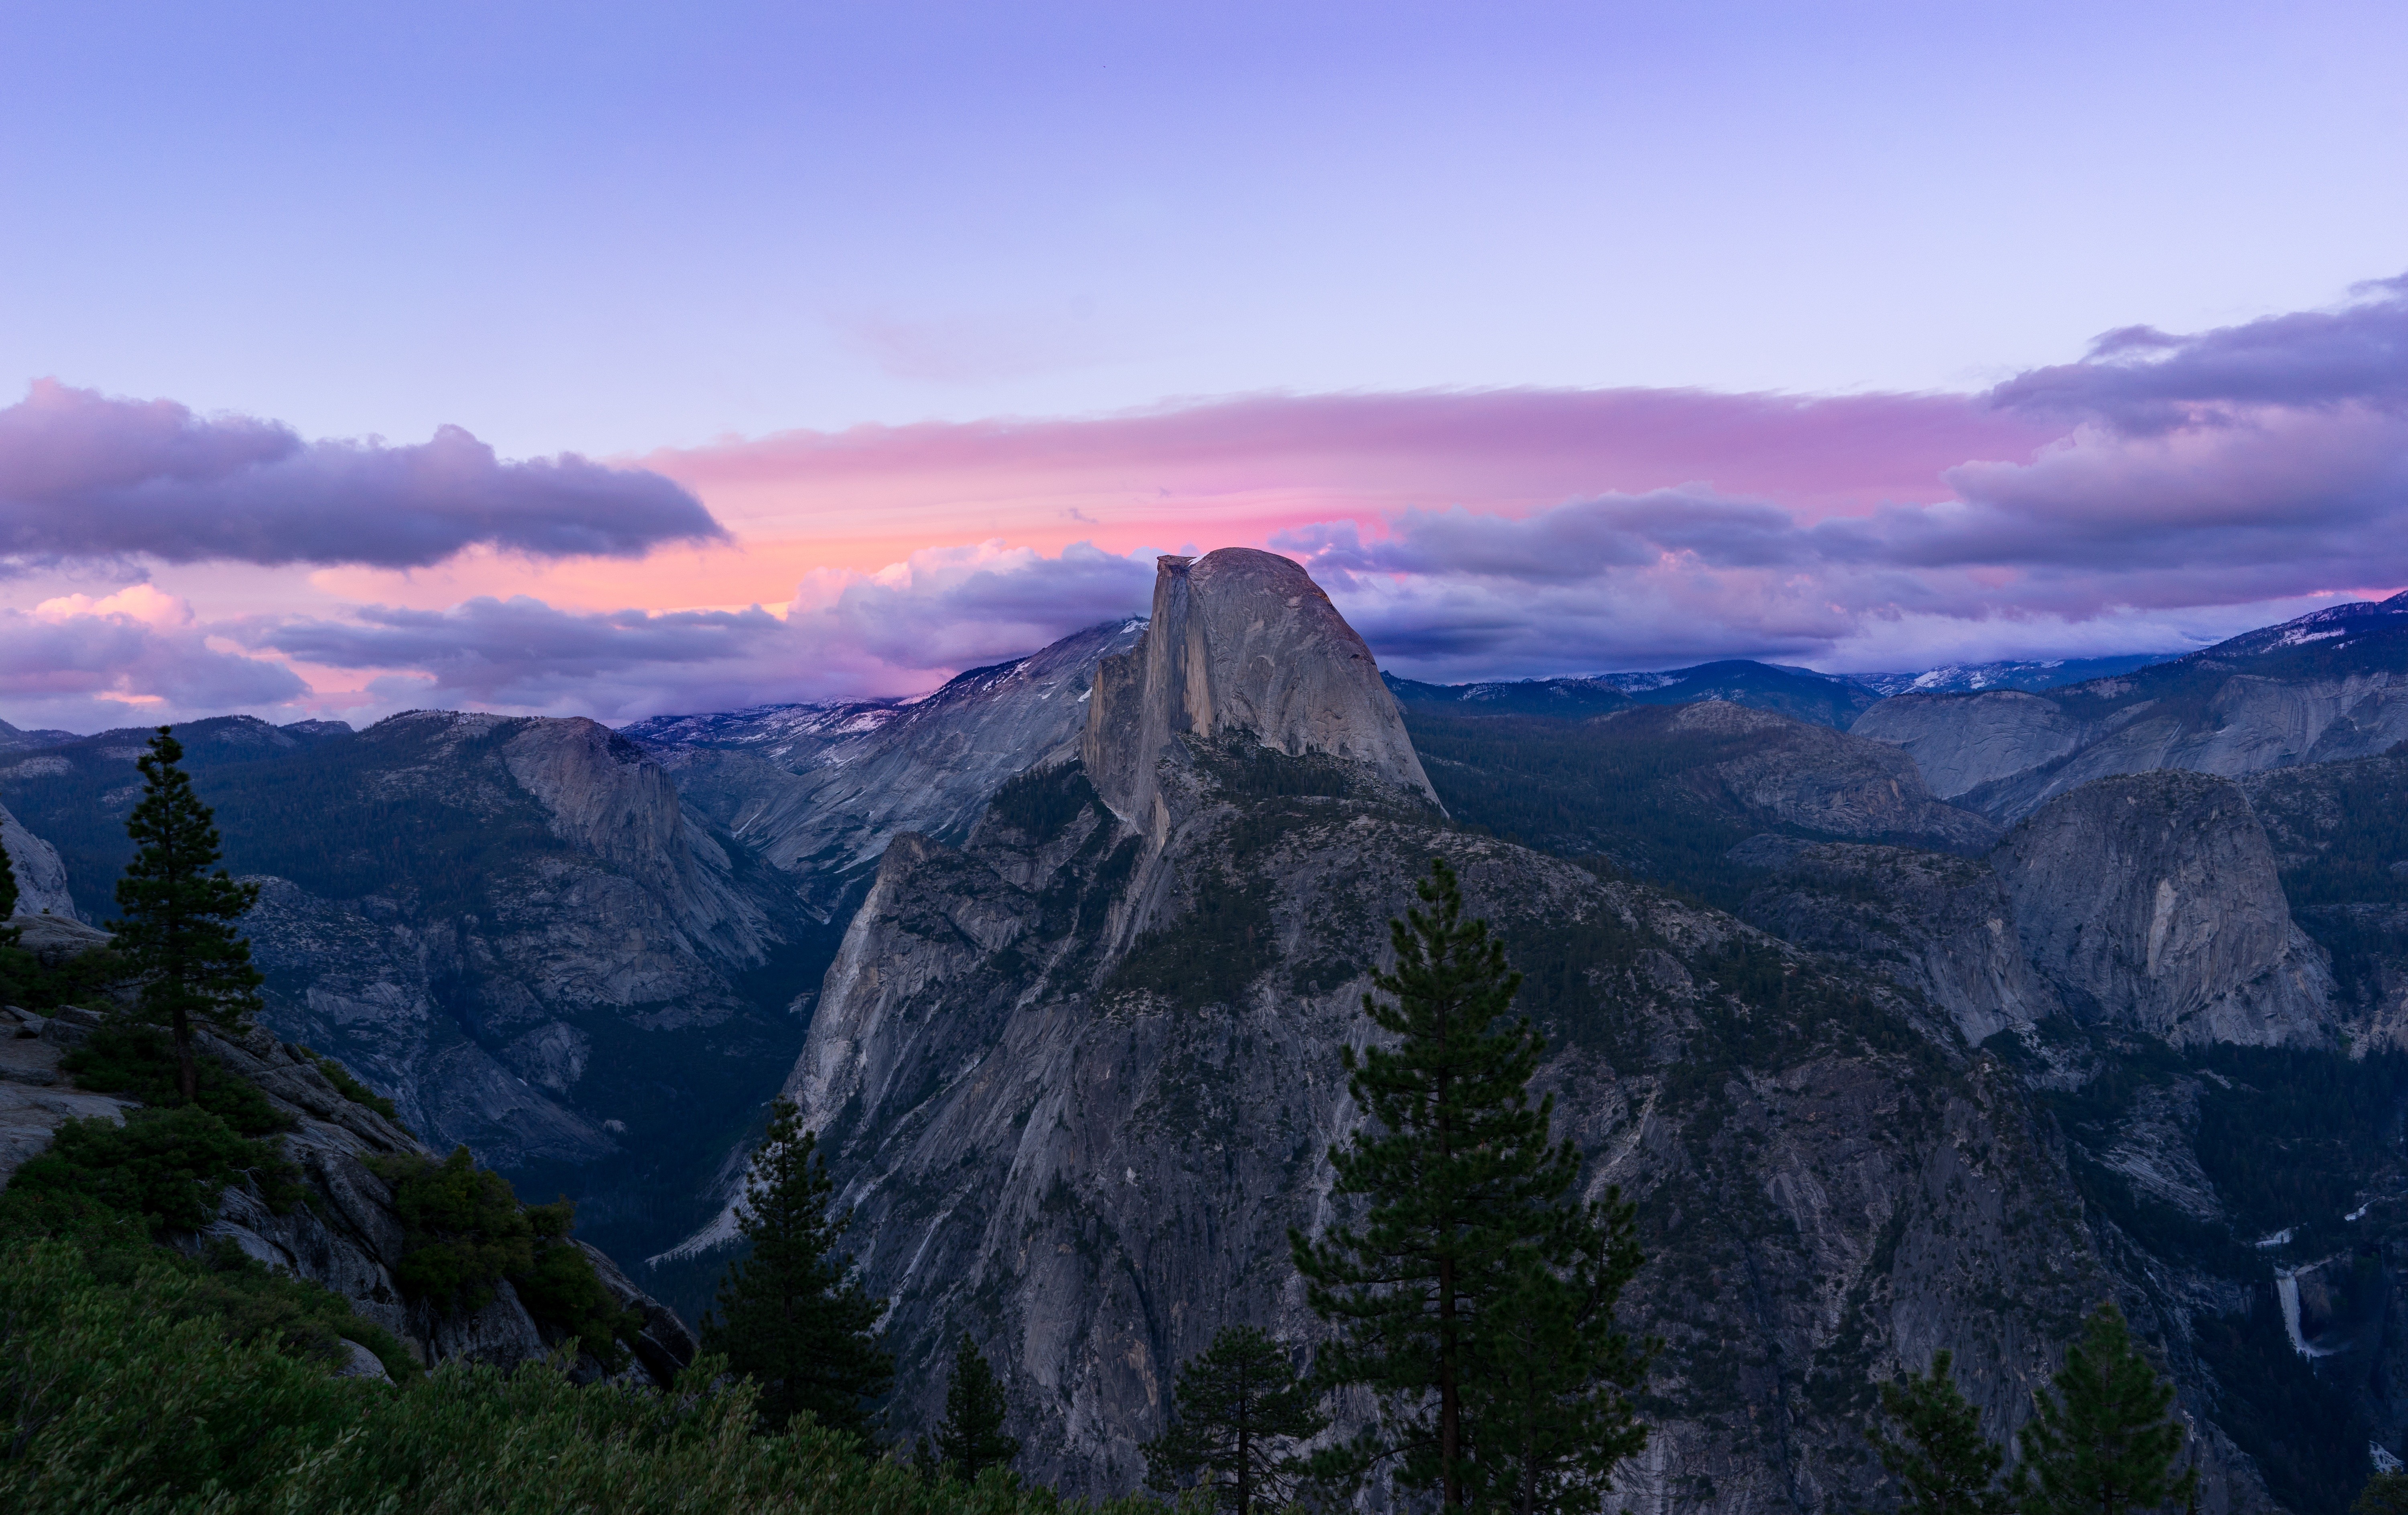 General 6000x3776 mountains sunset top view nature USA California Yosemite National Park Glacier Point Half Dome